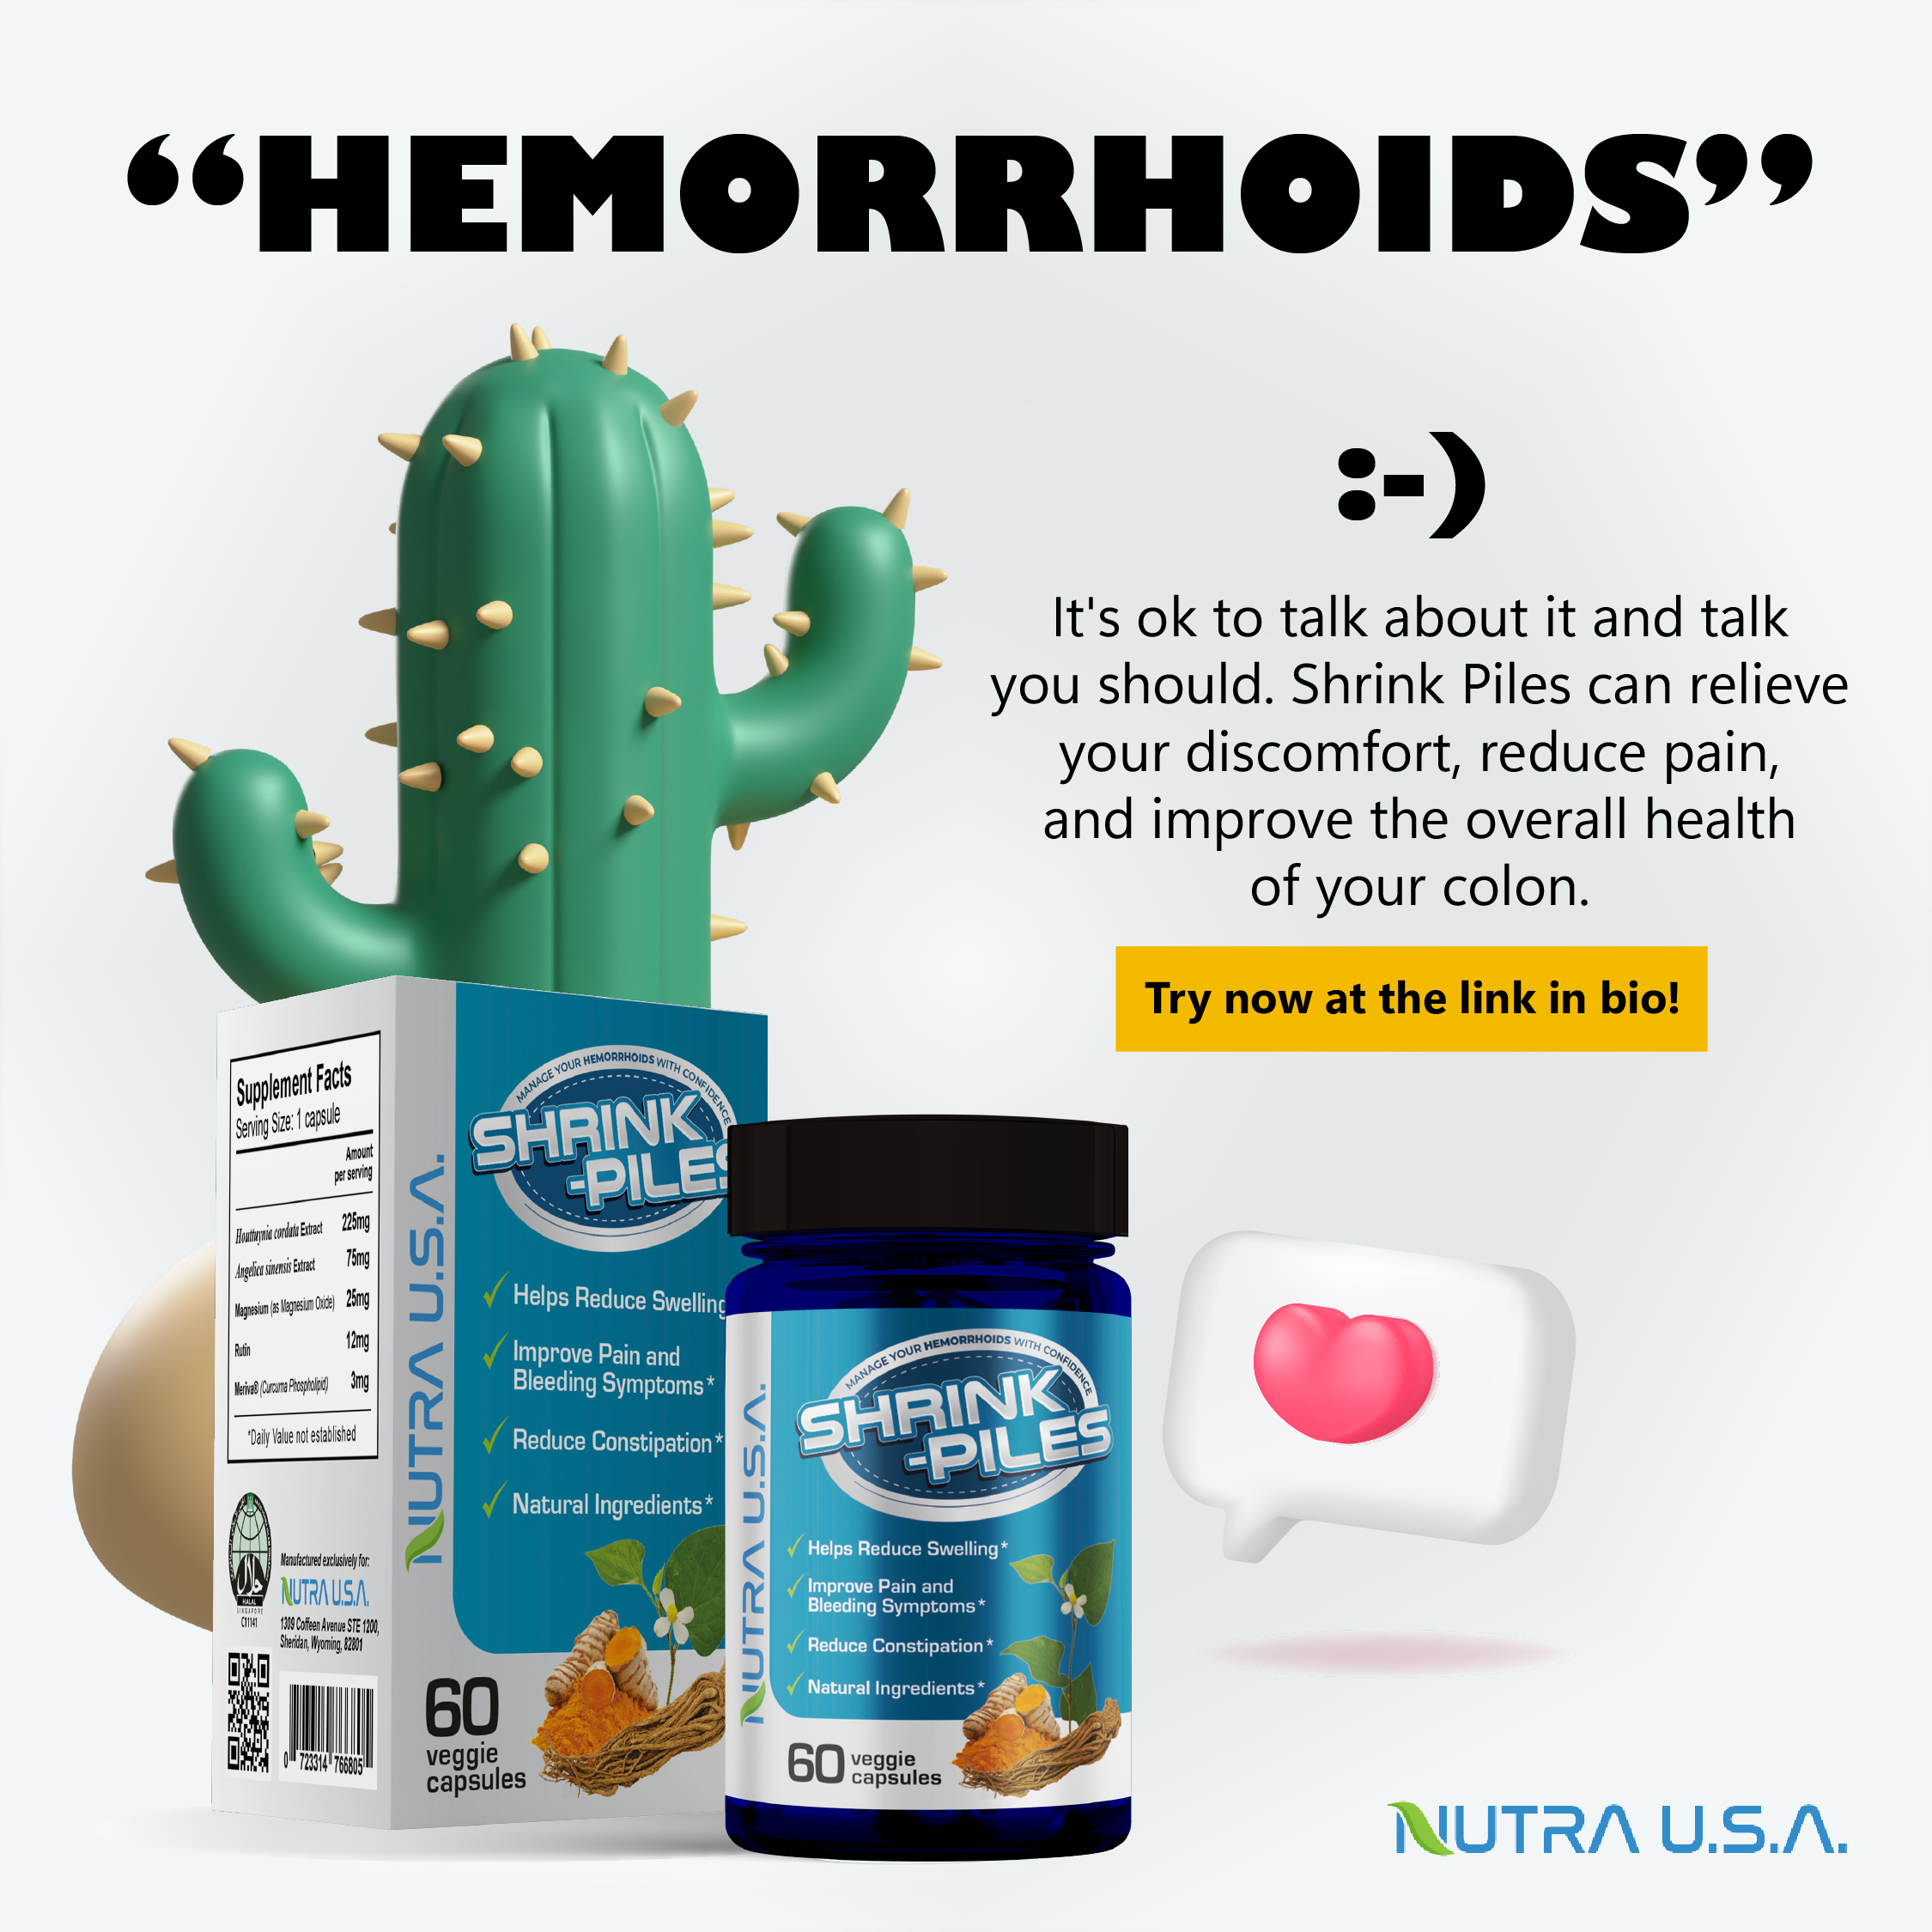 8 facts about hemorrhoids